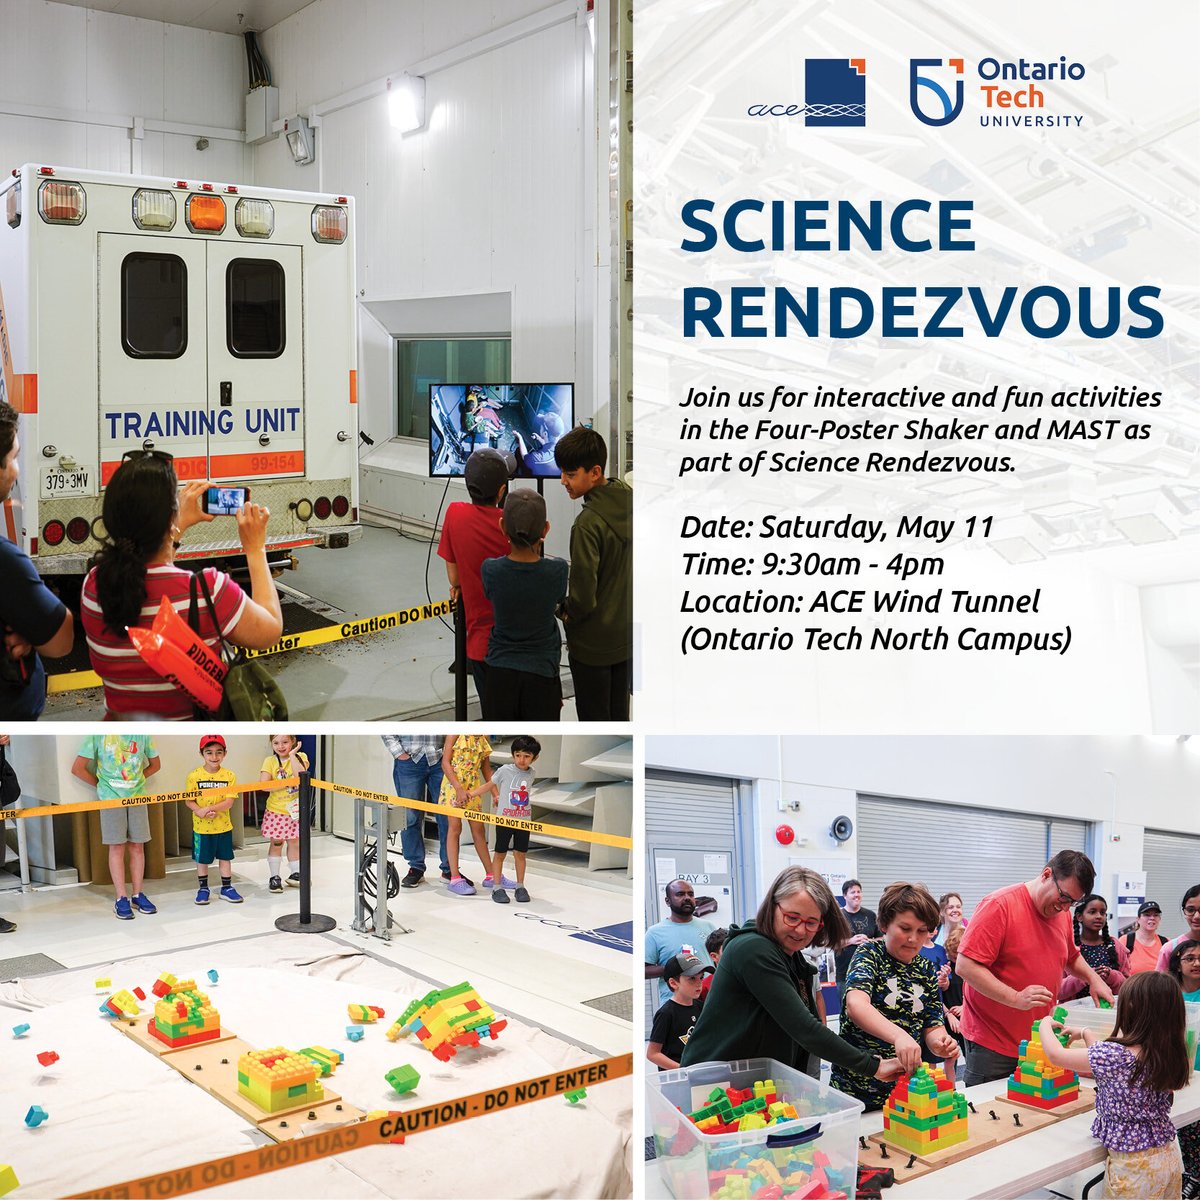 🔬 Ontario Tech University's ACE Core Research Facility is thrilled to dive back into Science Rendezvous, opening our doors to local youth on May 11th for a celebration of science! Join us as we spark curiosity and inspire the next generation of innovators.
#ACE #OntarioTech